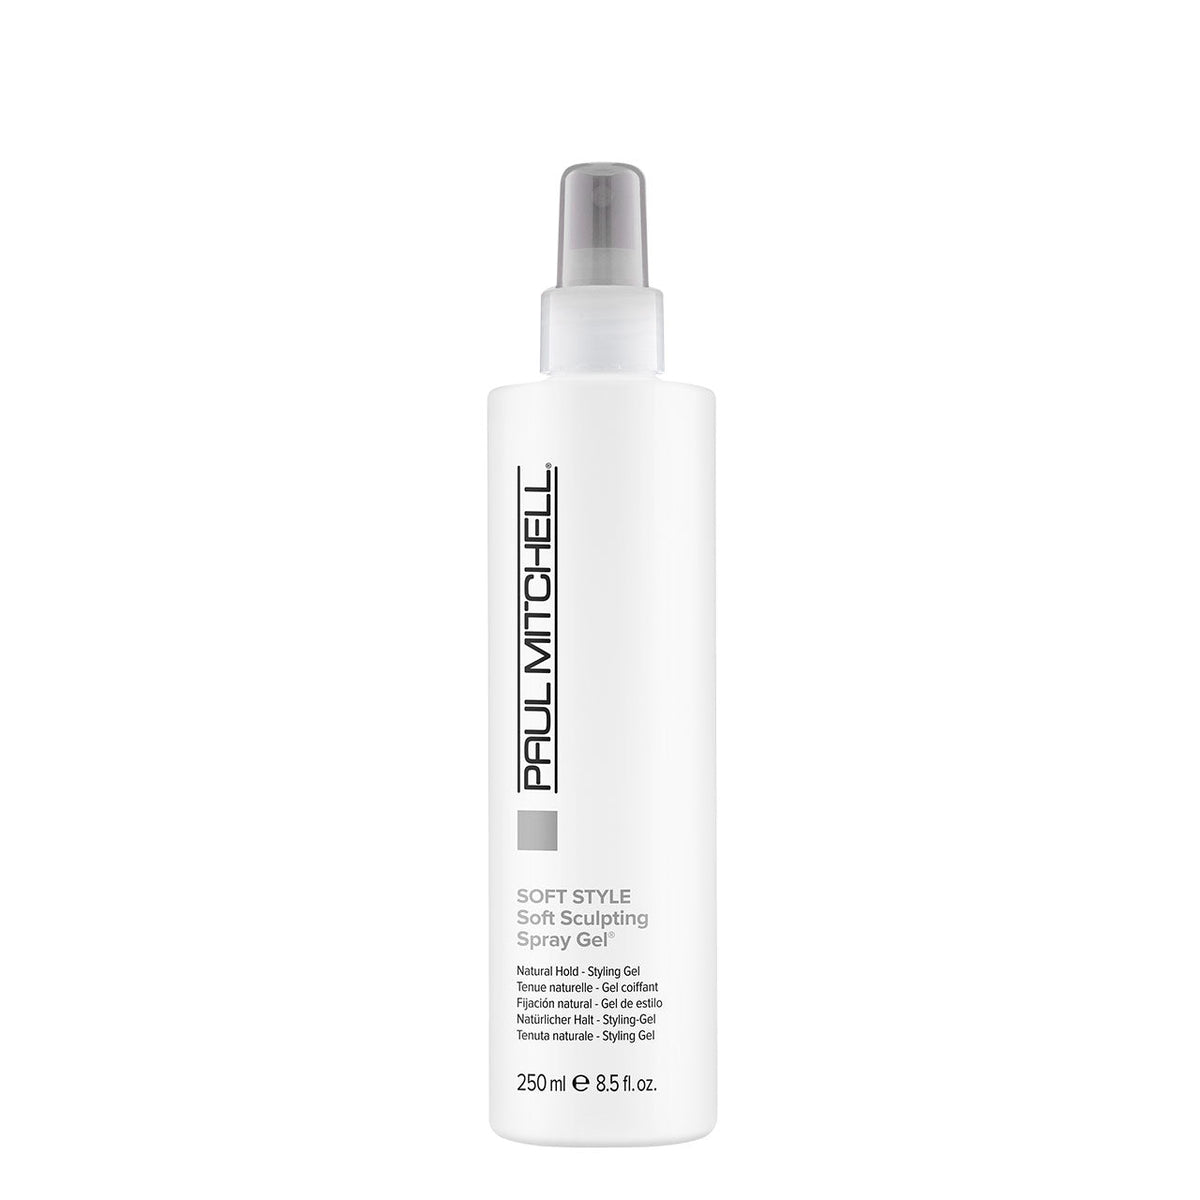 Soft Style Soft Sculpting Spray Gel - by Paul Mitchell |ProCare Outlet|